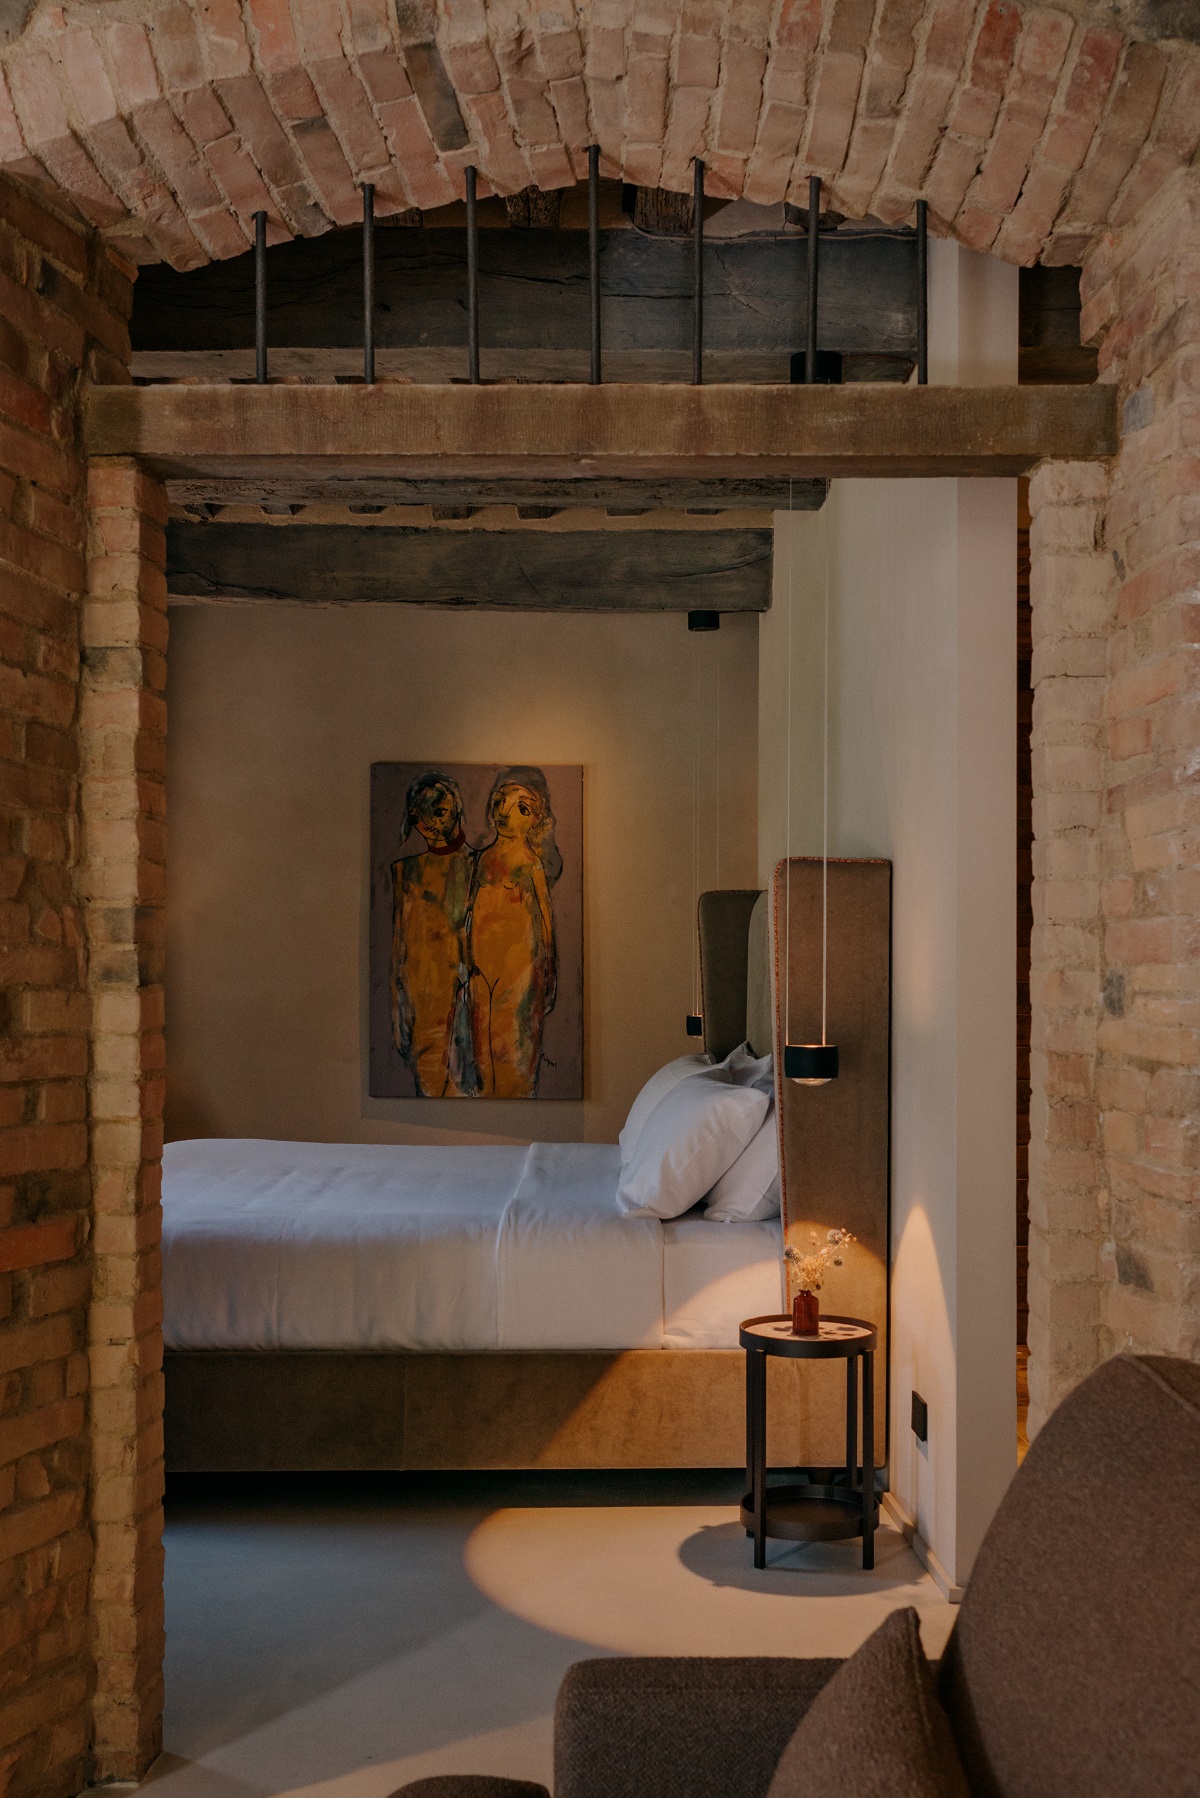 Original architecture shelters the hotel in Italy